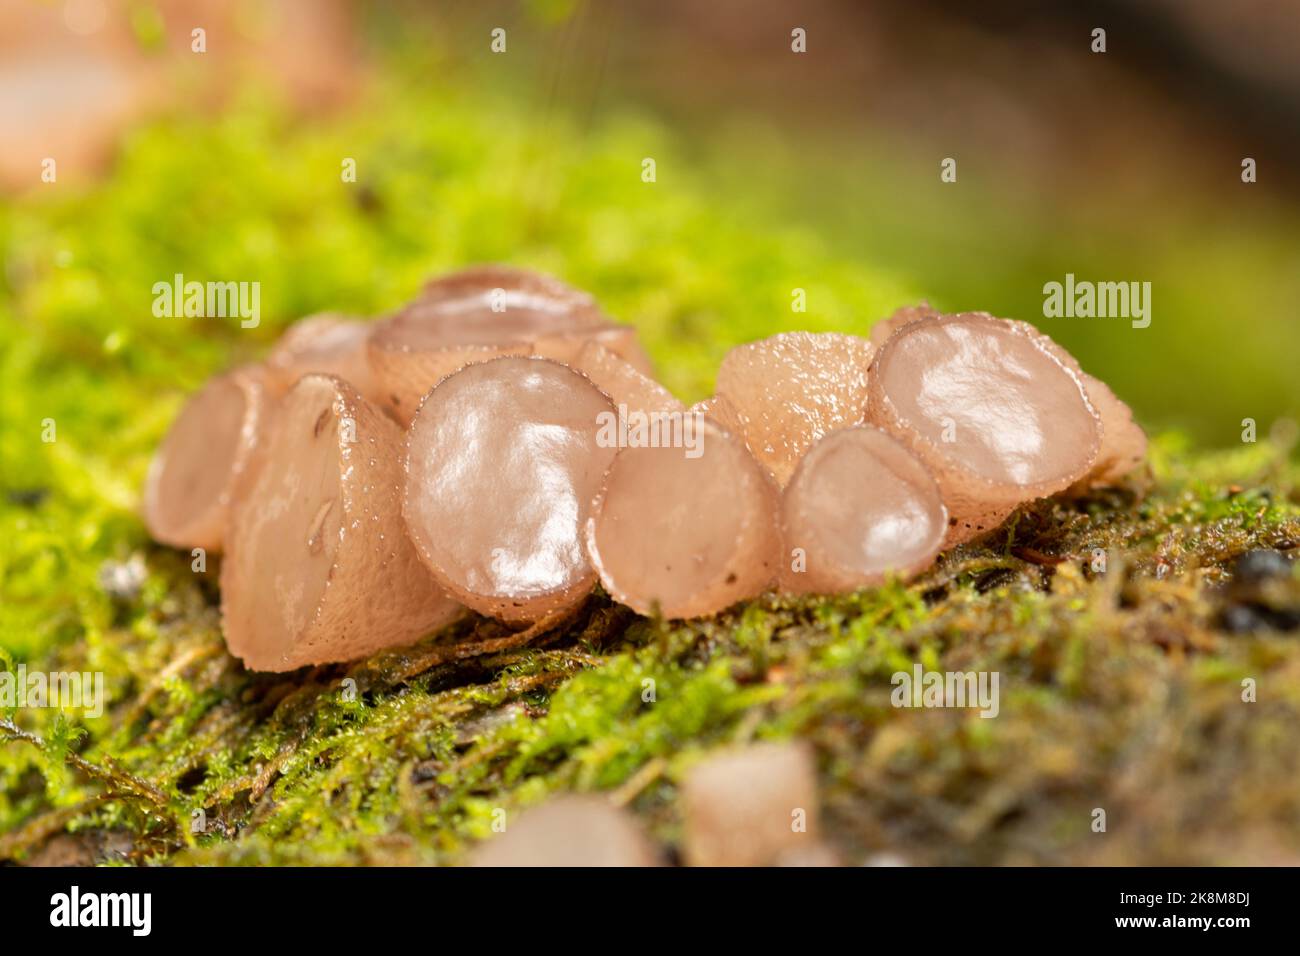 Beech jellydisc fungi (Neobulgaria pura), jelly-like fungus growing on fallen trunk of a beech tree during Autumn or October, West Sussex, England, UK Stock Photo